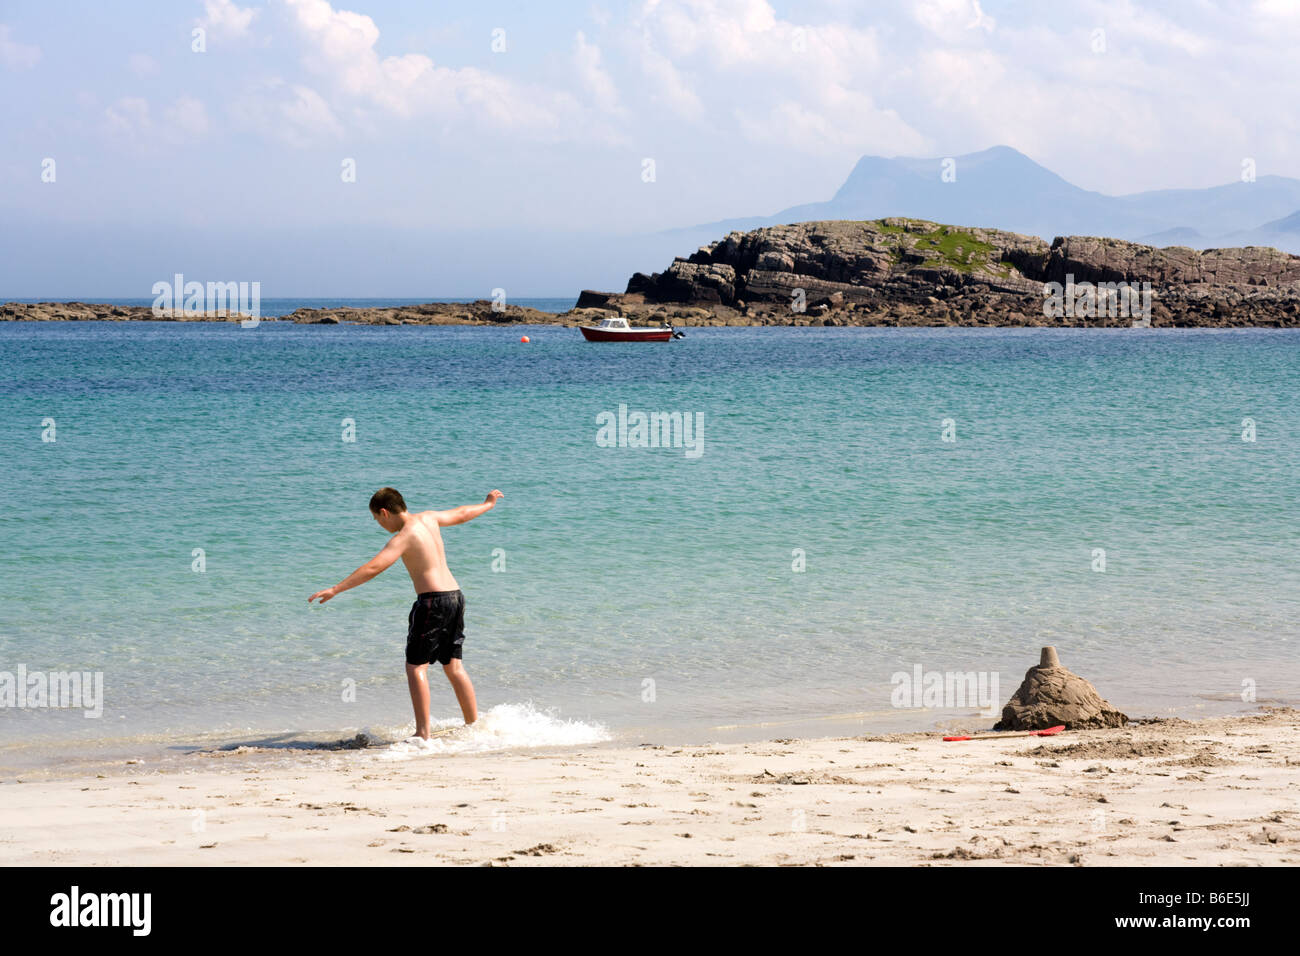 An eleven year old boy skimboarding on the beach at Mellon Udrigle, Wester Ross, Highland, Scotland Stock Photo